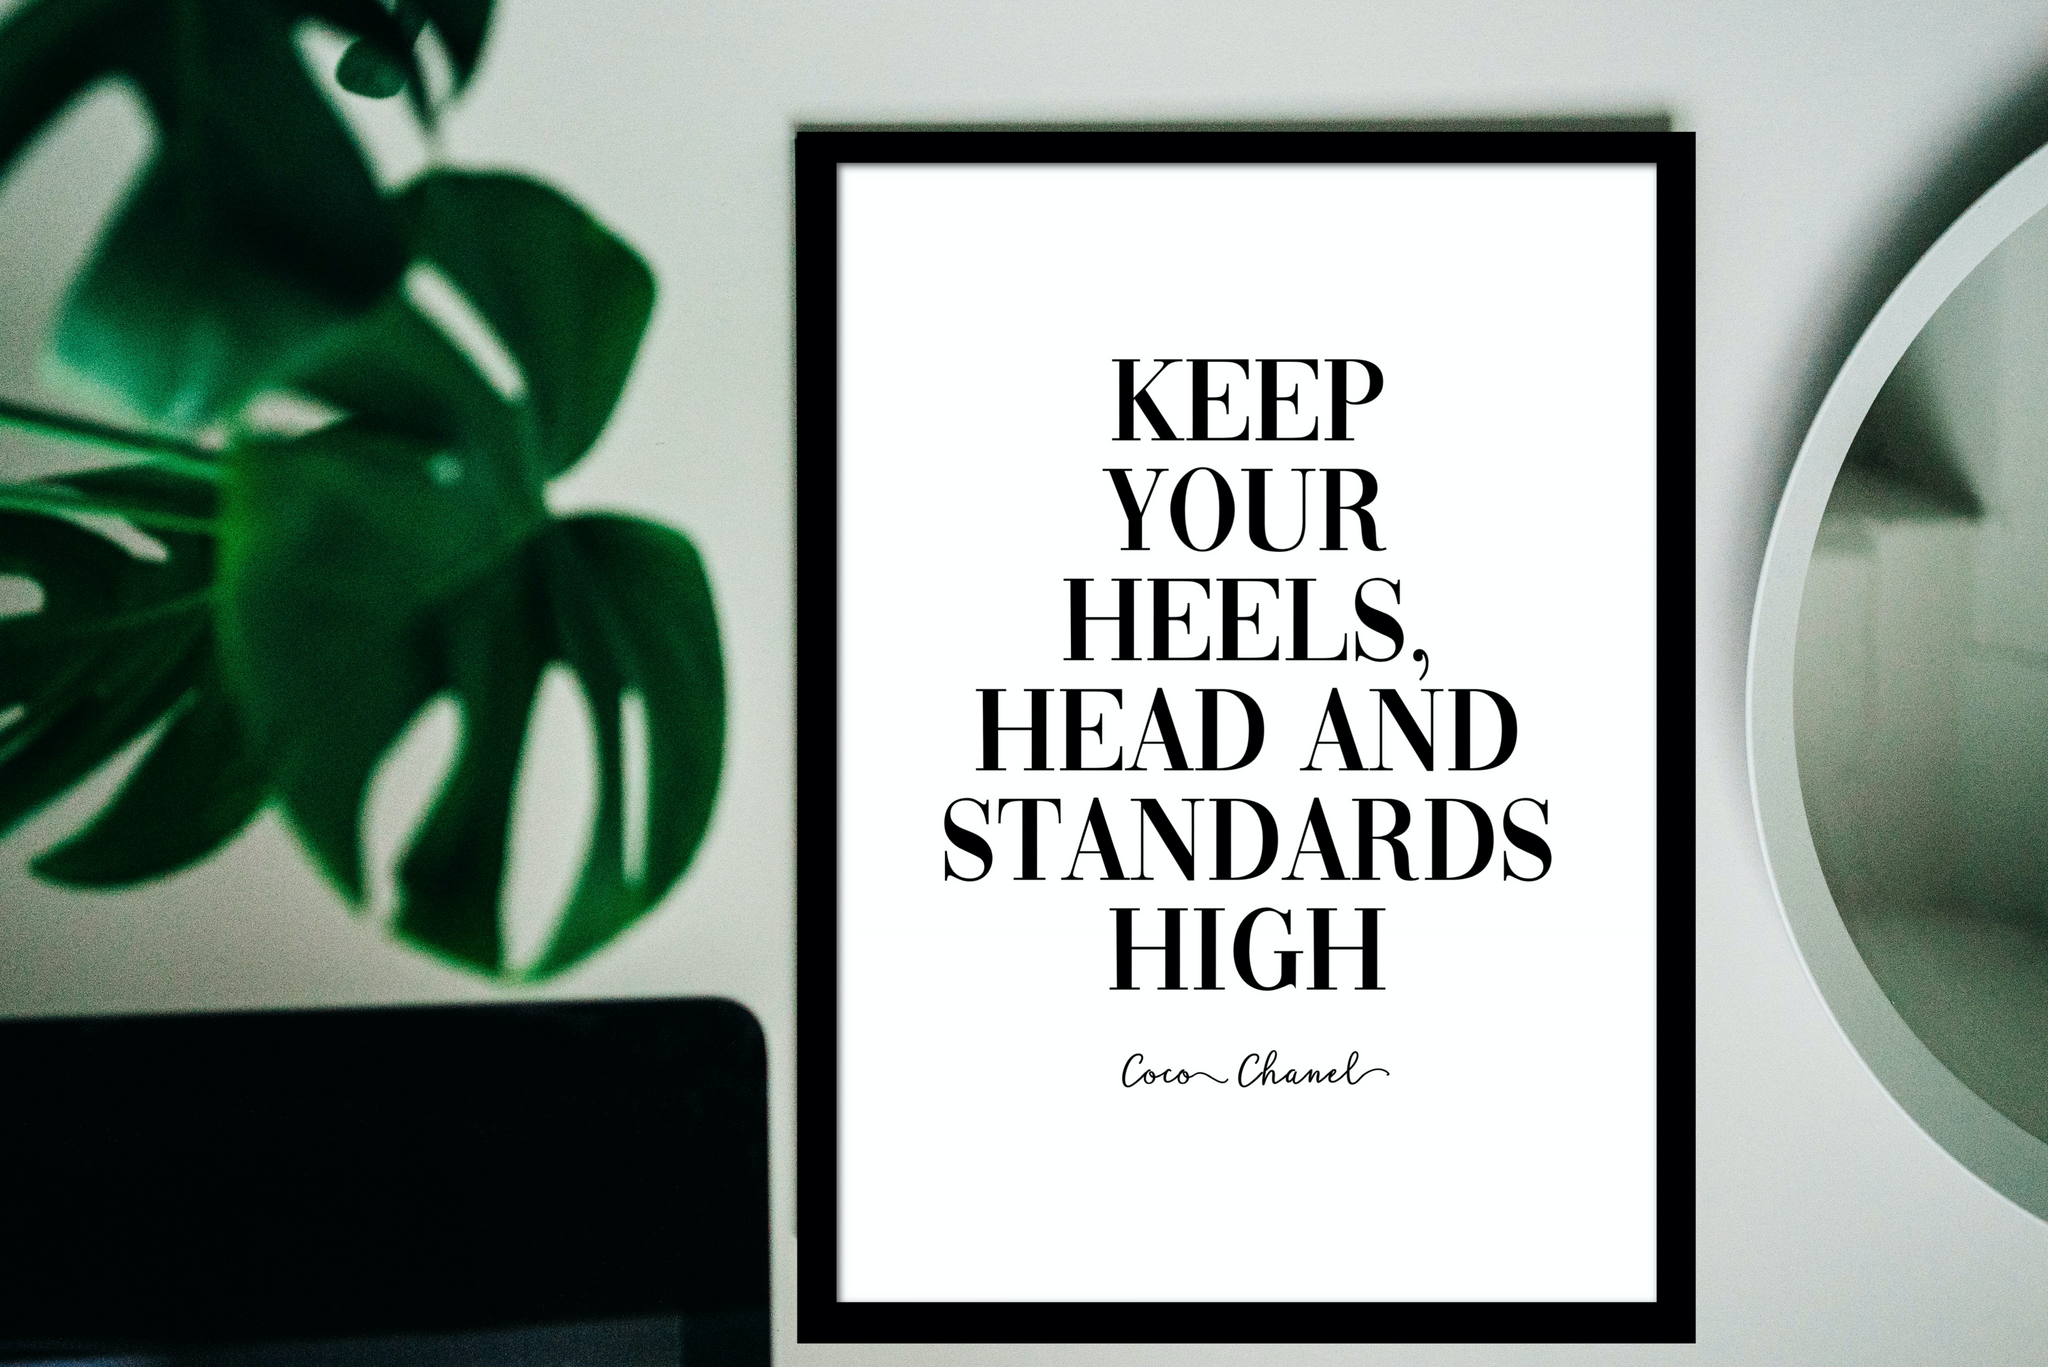 Fashion & Beauty: Keep your heels, head and standards high. Coco